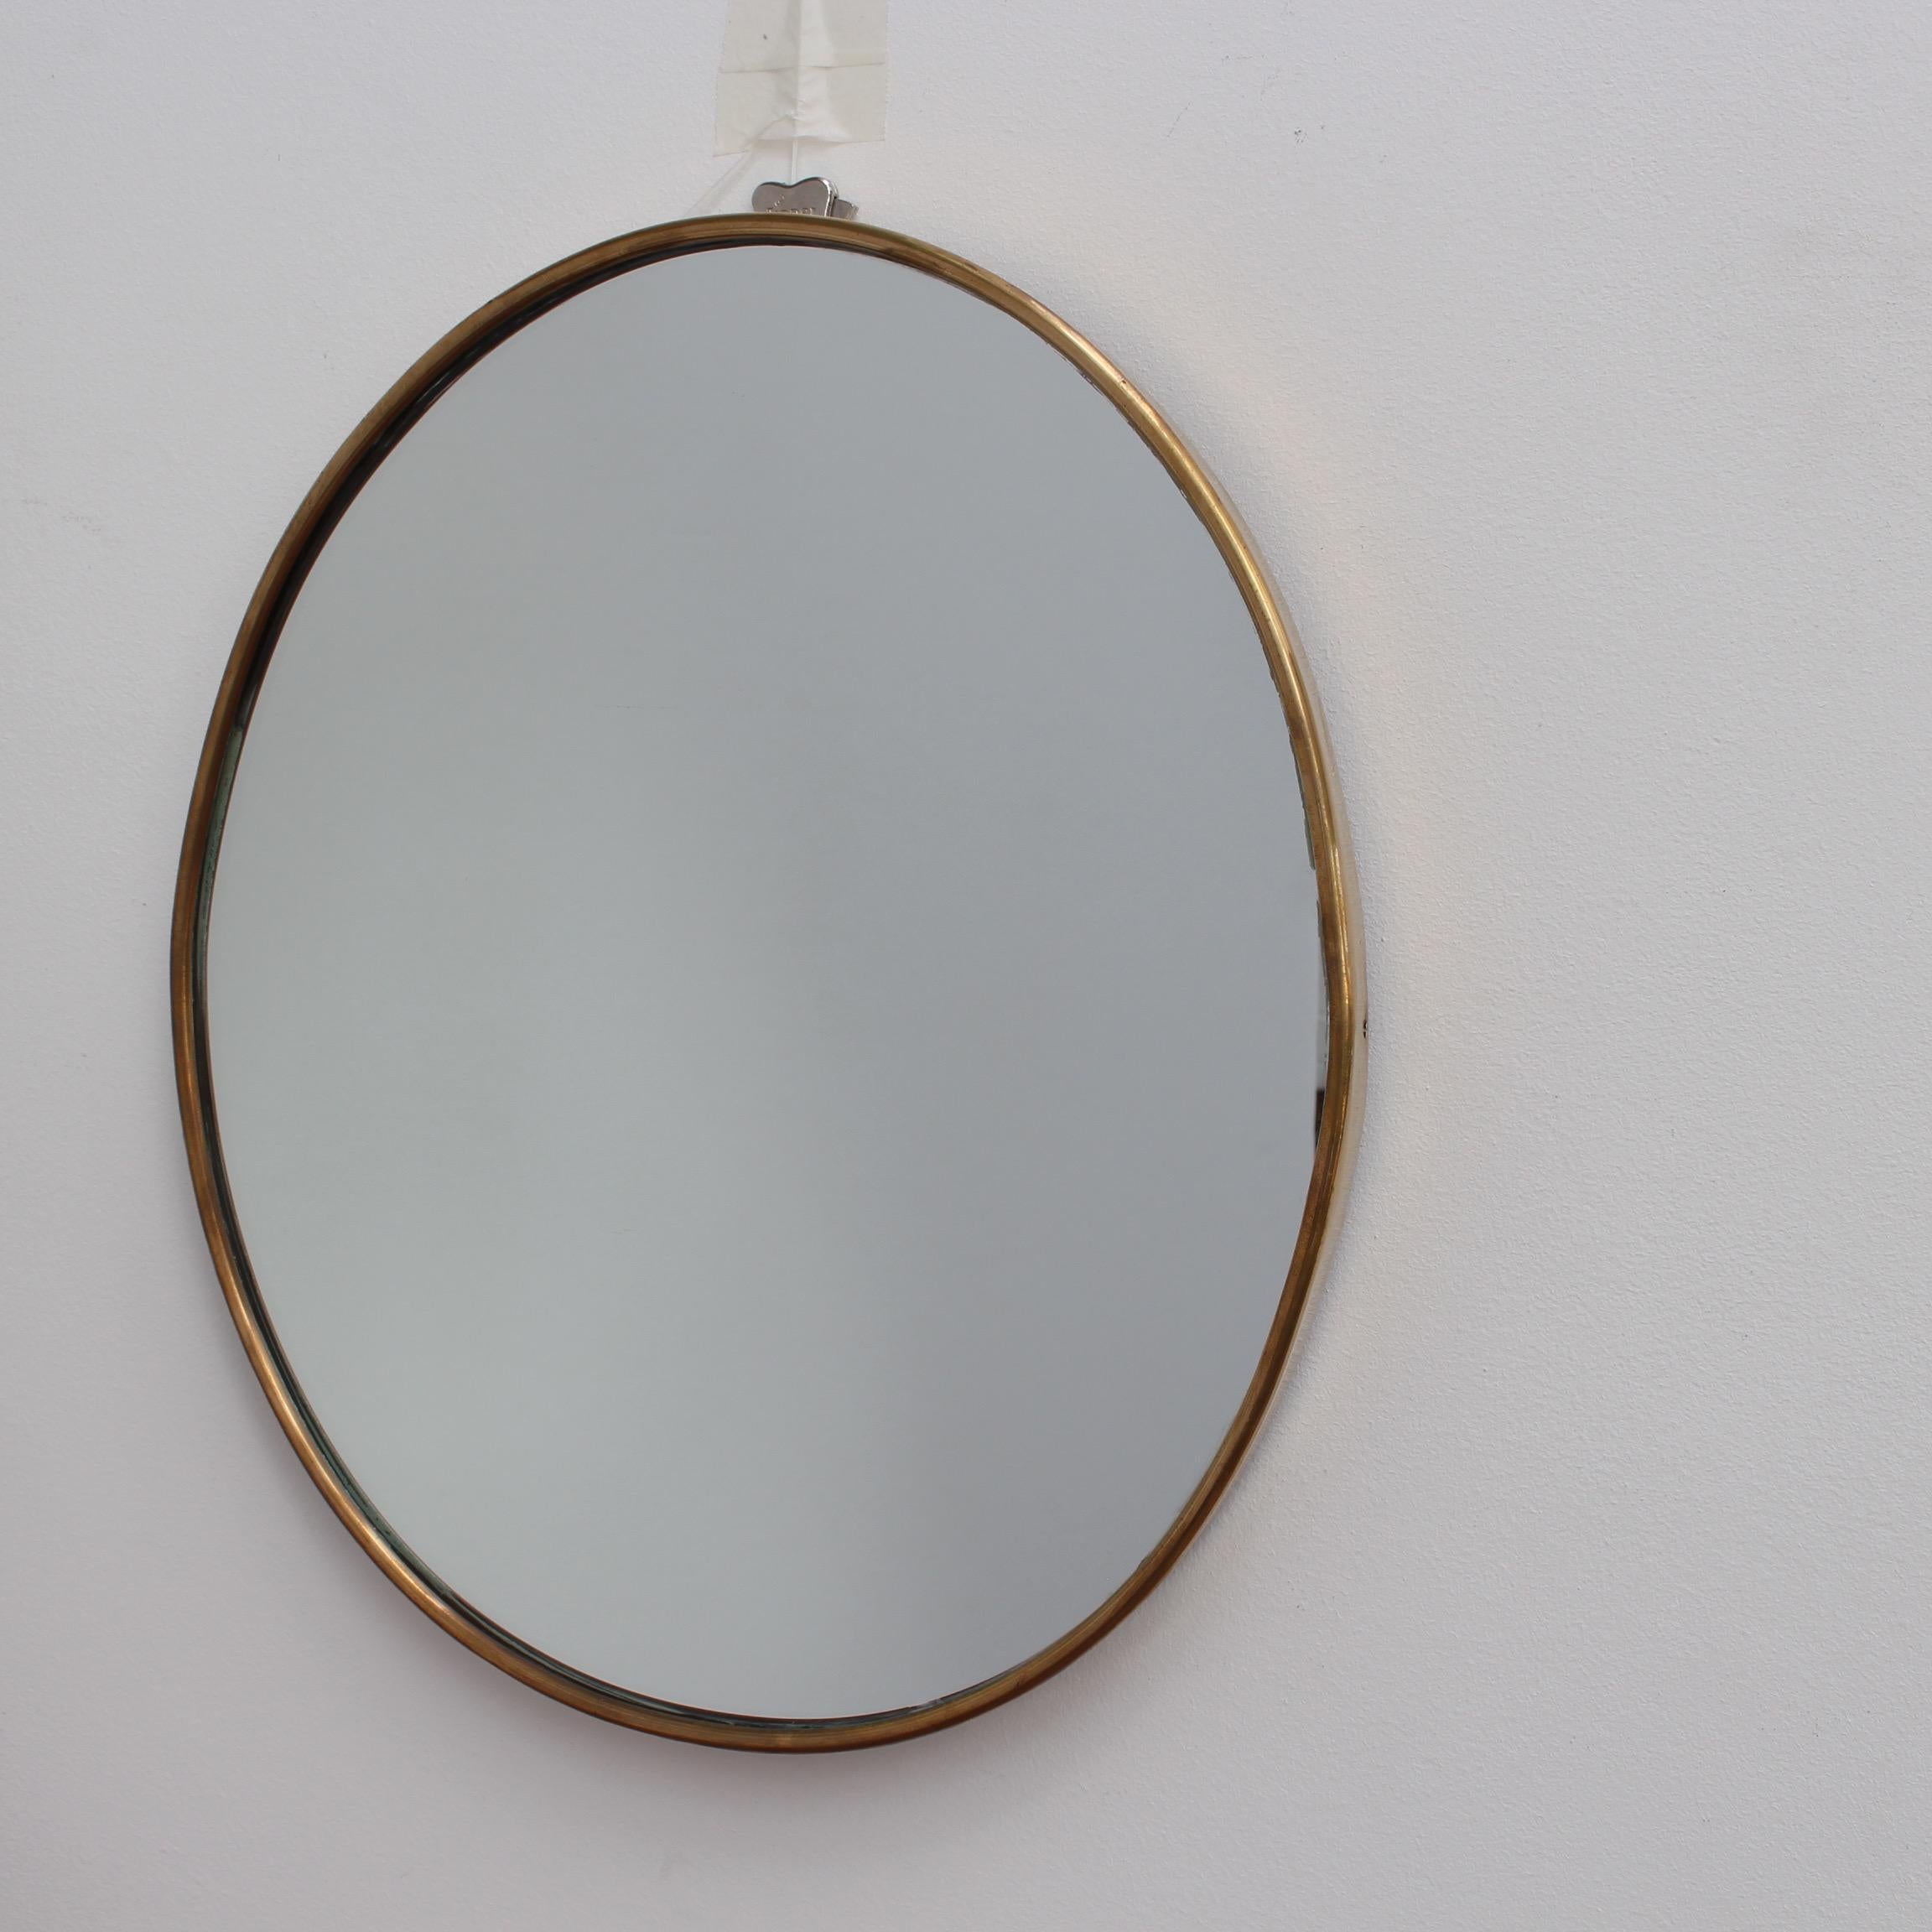 Small-scale midcentury Italian wall mirror with brass frame (circa 1950s). The mirror is porthole-shaped with sensuous curves. It is classically elegant and distinctive in a modern Gio Ponti style in good vintage condition. As seen in the